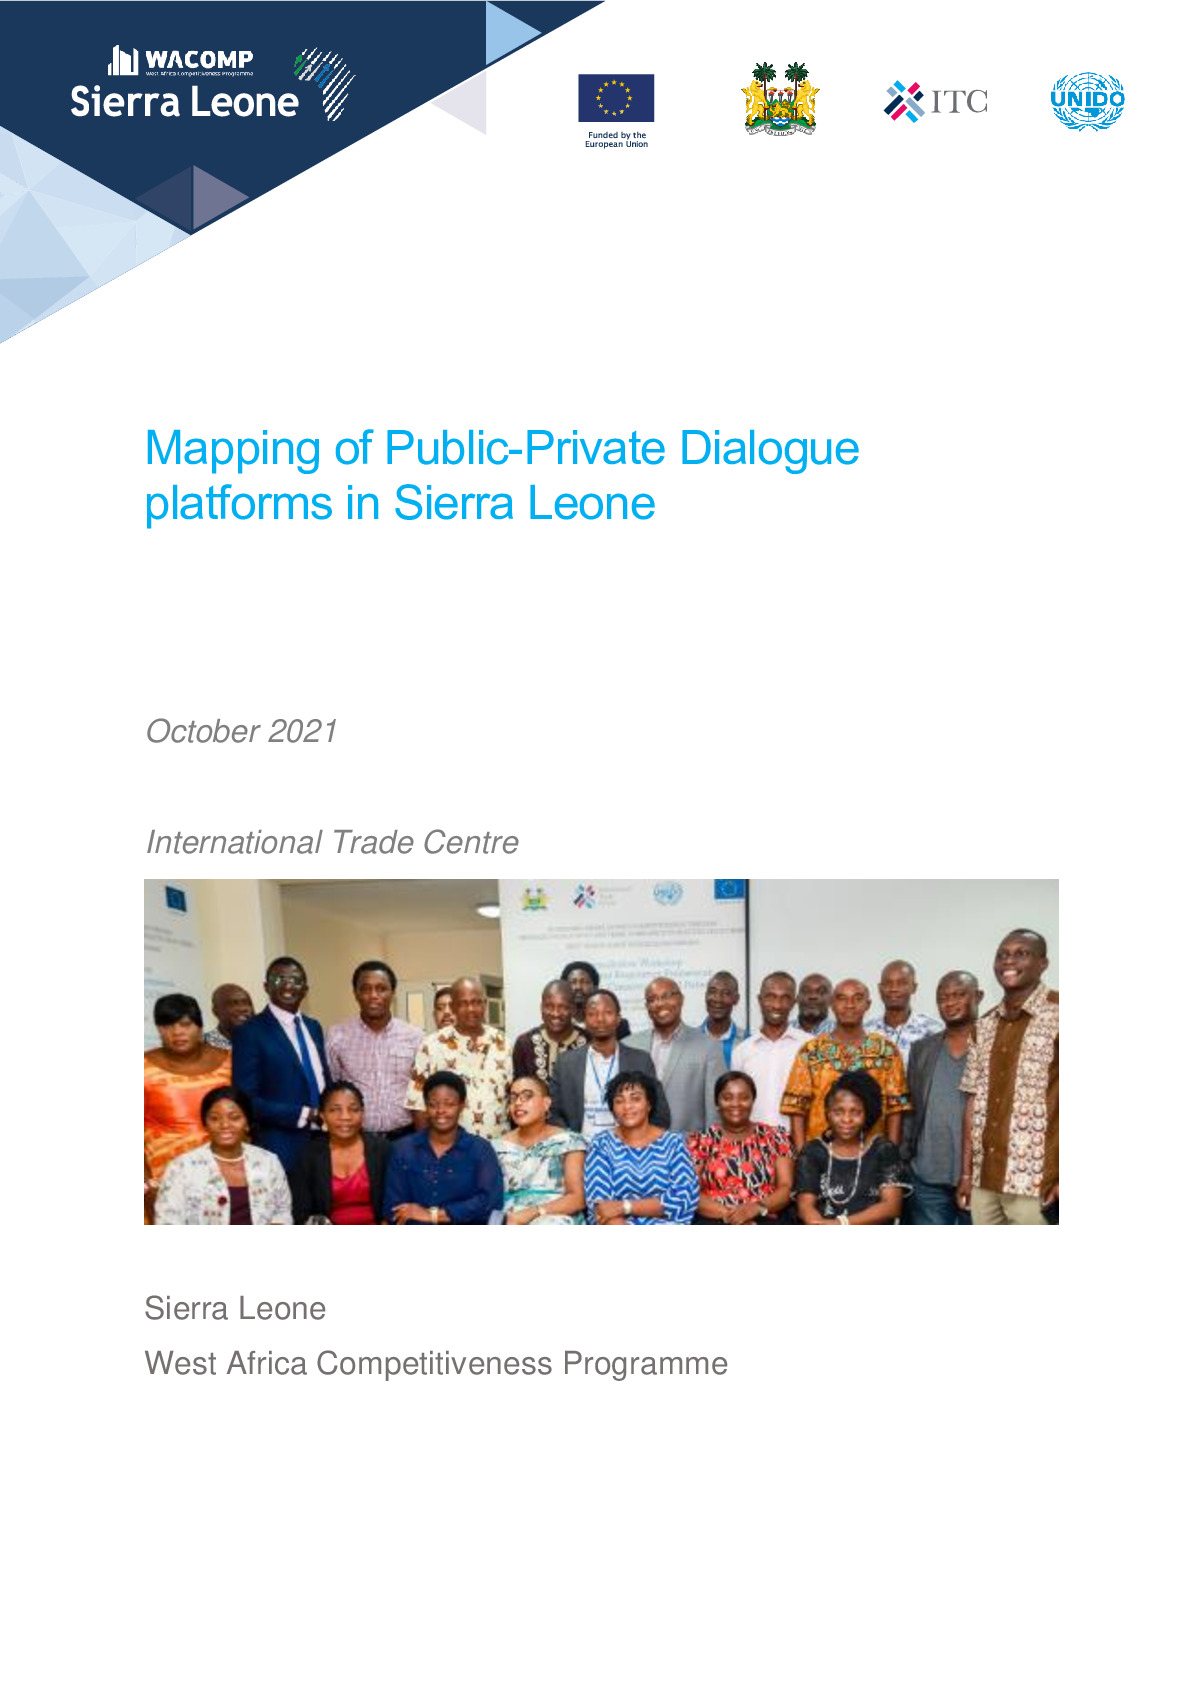 Mapping of PPD platforms in Sierra Leone (10.2021)